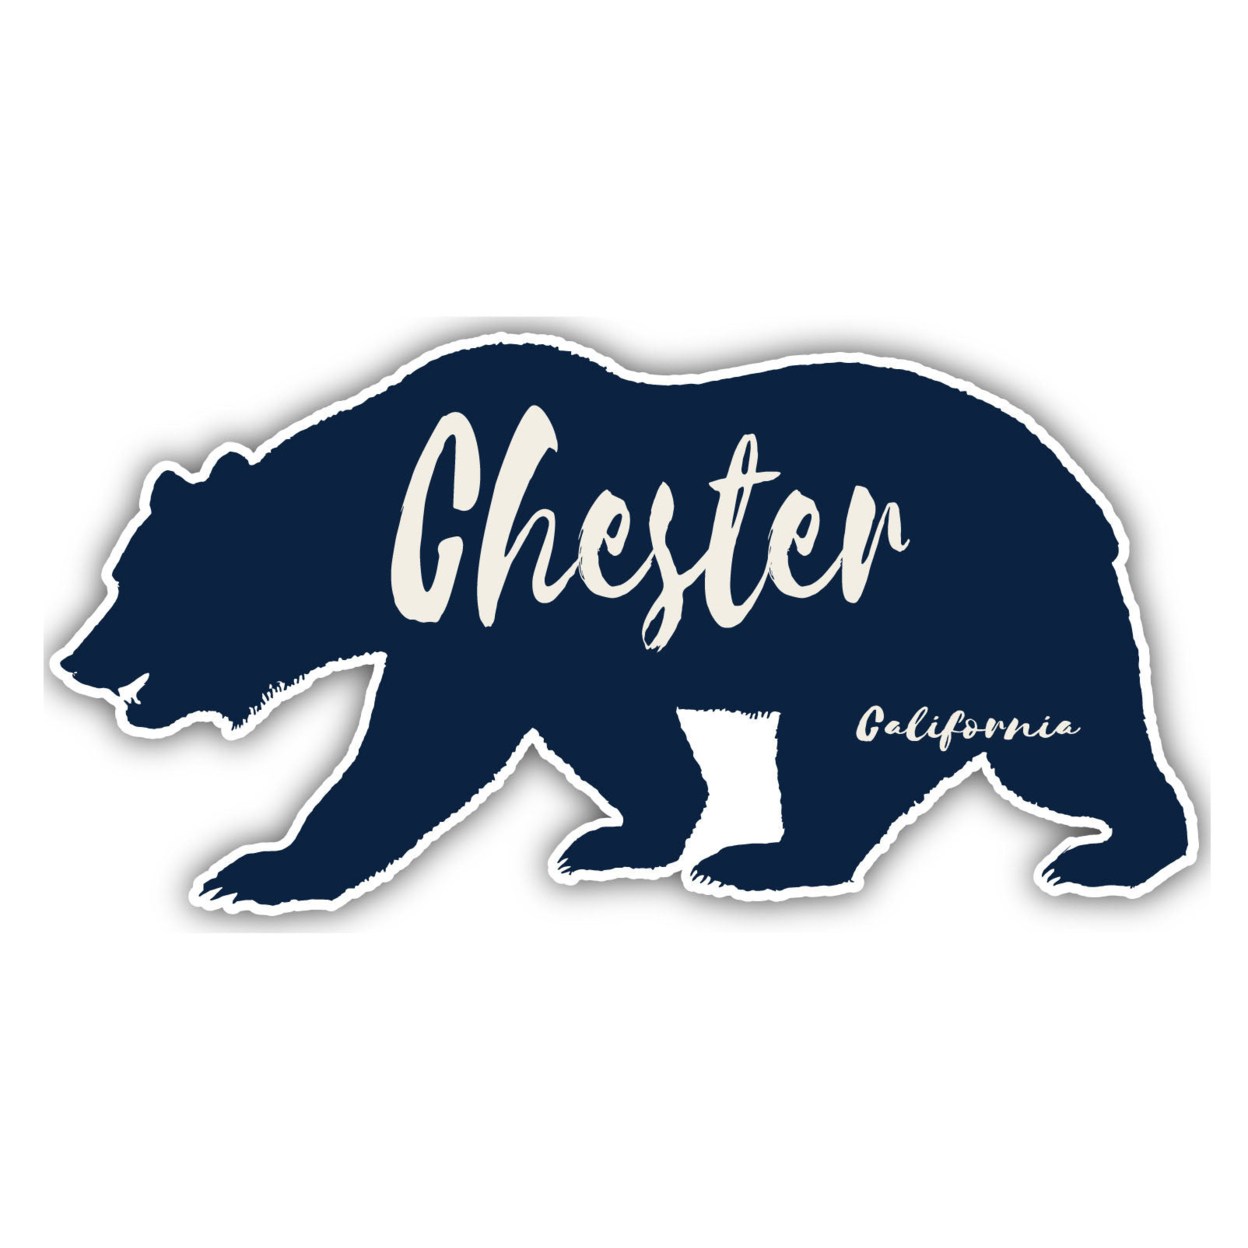 Chester California Souvenir Decorative Stickers (Choose Theme And Size) - 4-Pack, 12-Inch, Bear